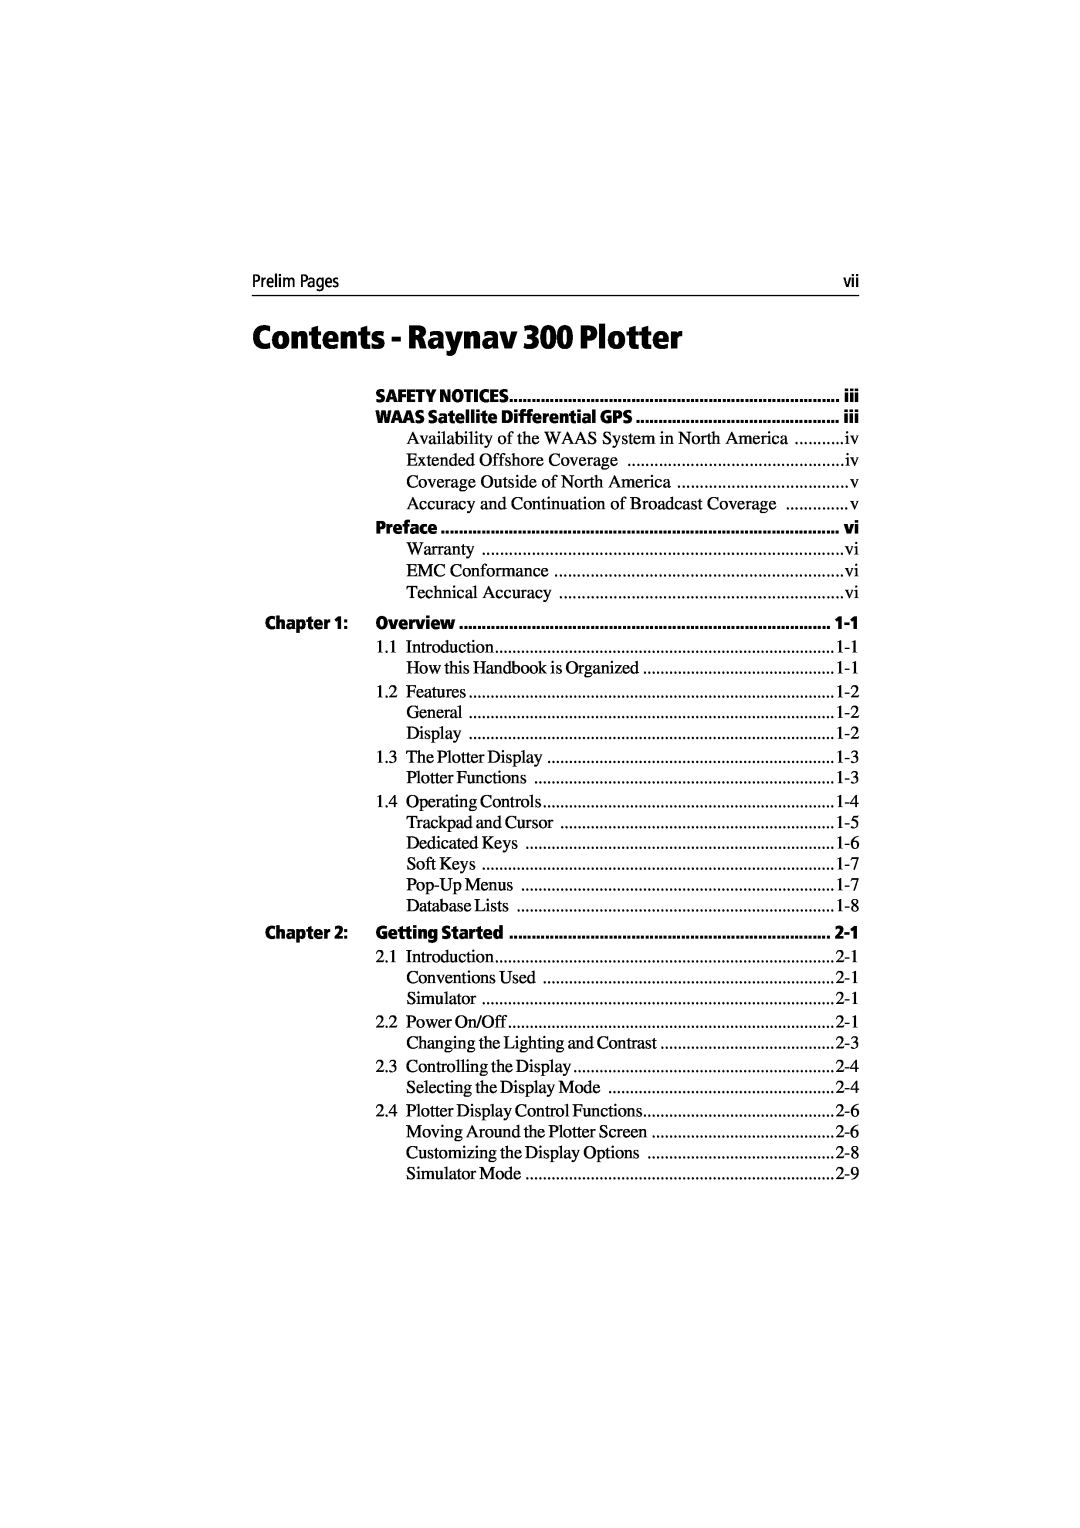 Raymarine Contents - Raynav 300 Plotter, Chapter, Safety Notices, WAAS Satellite Differential GPS, Preface, Overview 